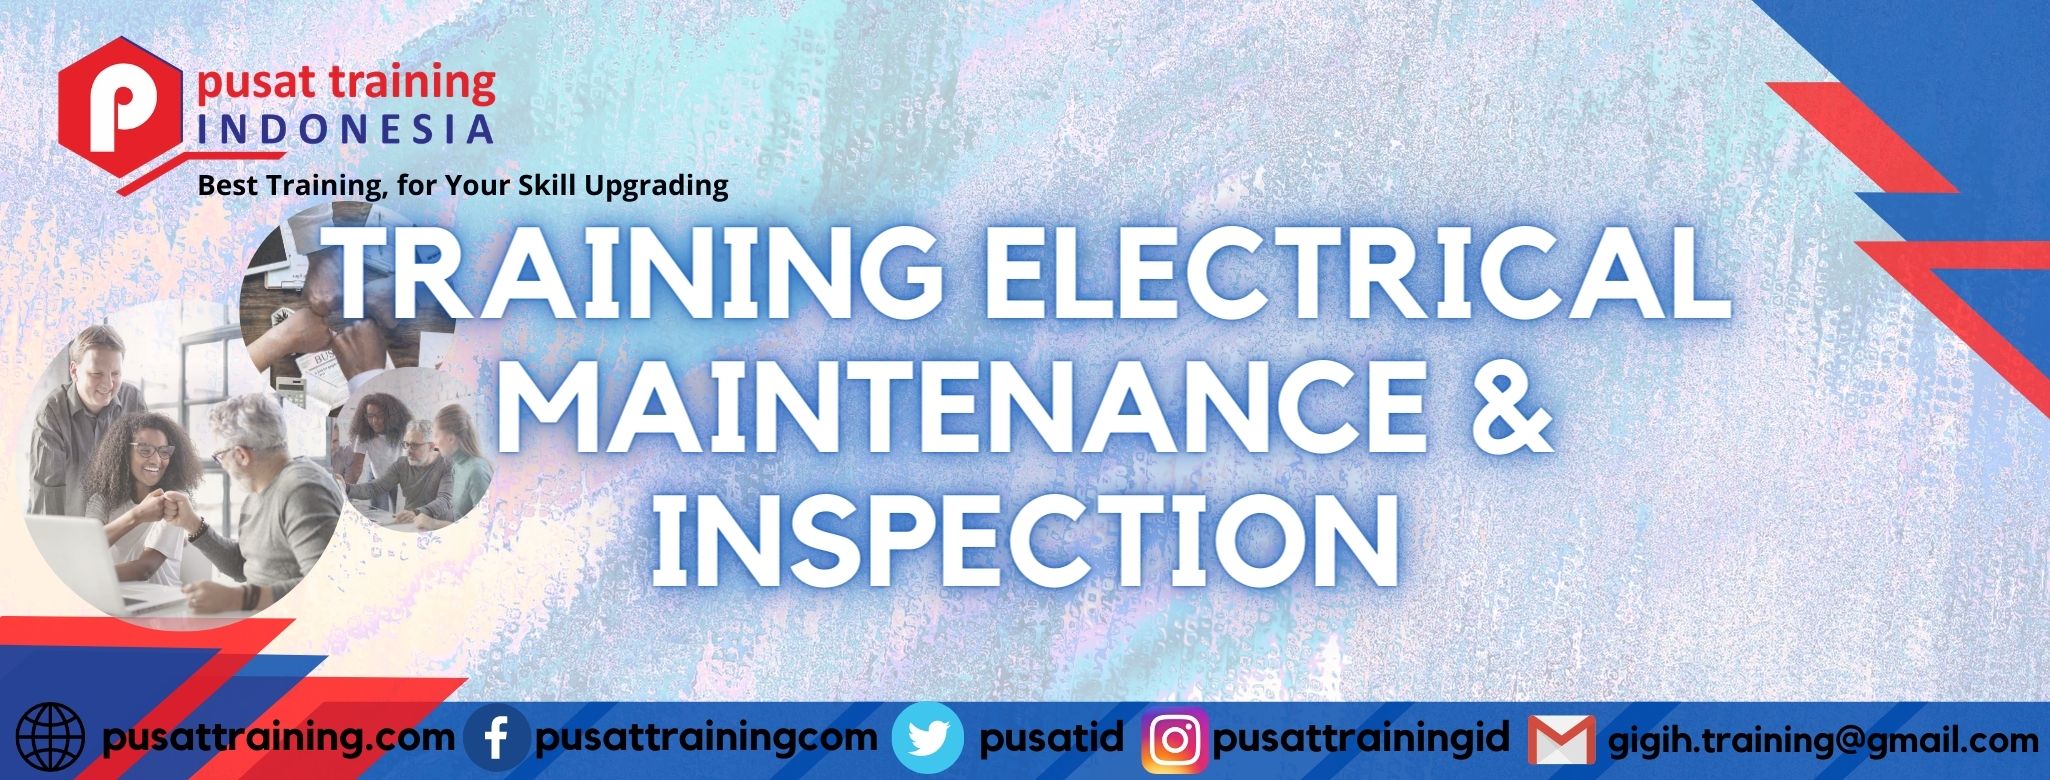 TRAINING ELECTRICAL MAINTENANCE & INSPECTION